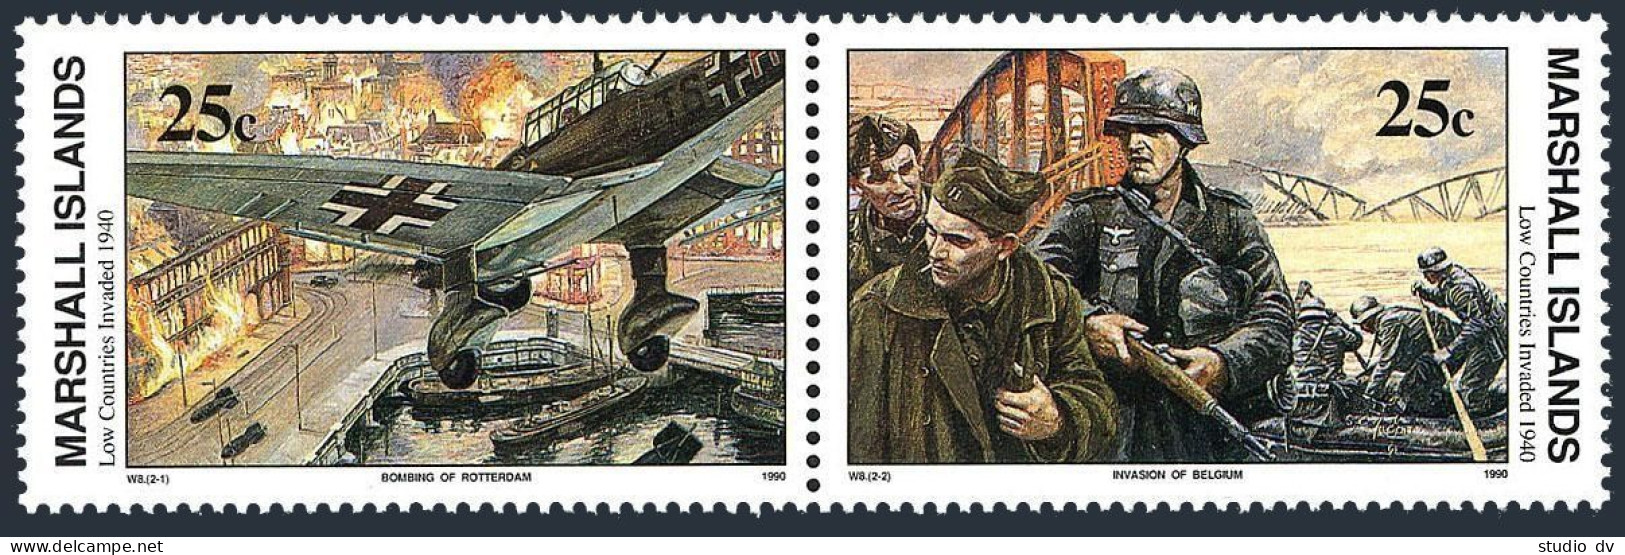 Marshall 249-250a Pair,MNH.Mi 303-304. WW II,Invasion Of The Low Countries,1990. - Marshall